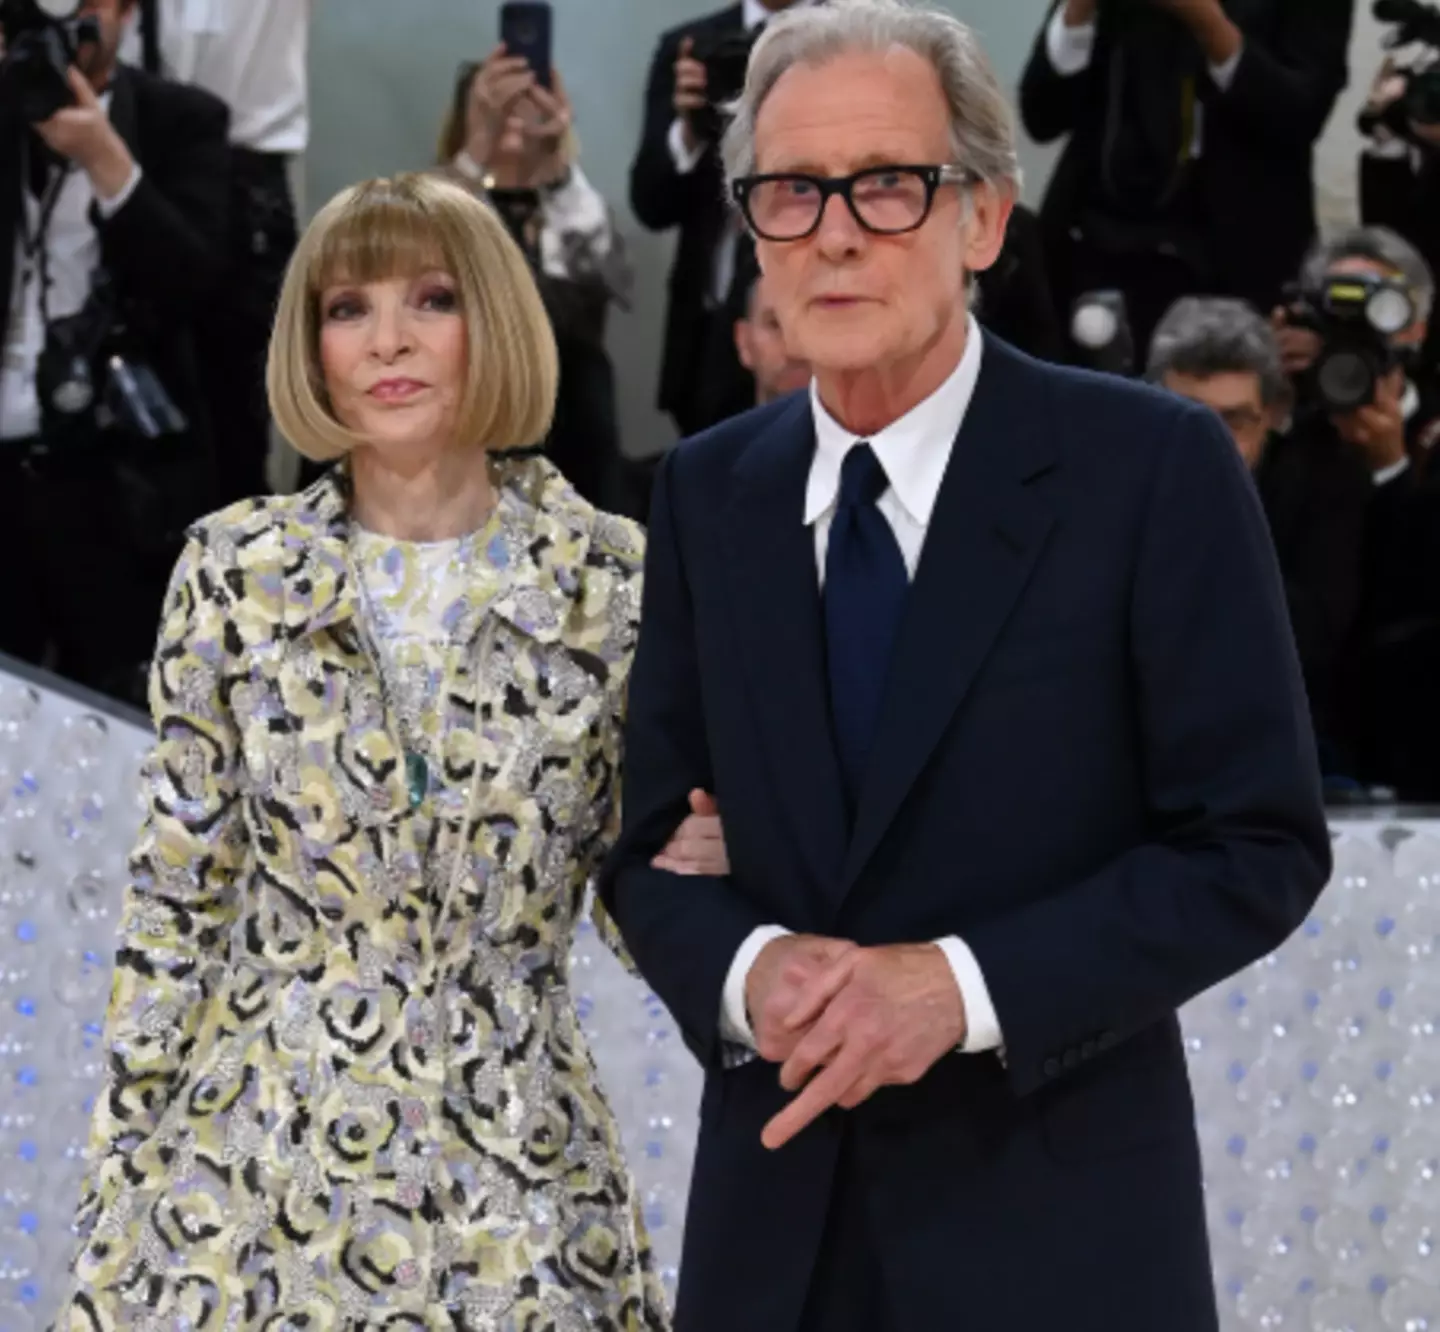 Wintour and Nighy walked arm-in-arm at the event.